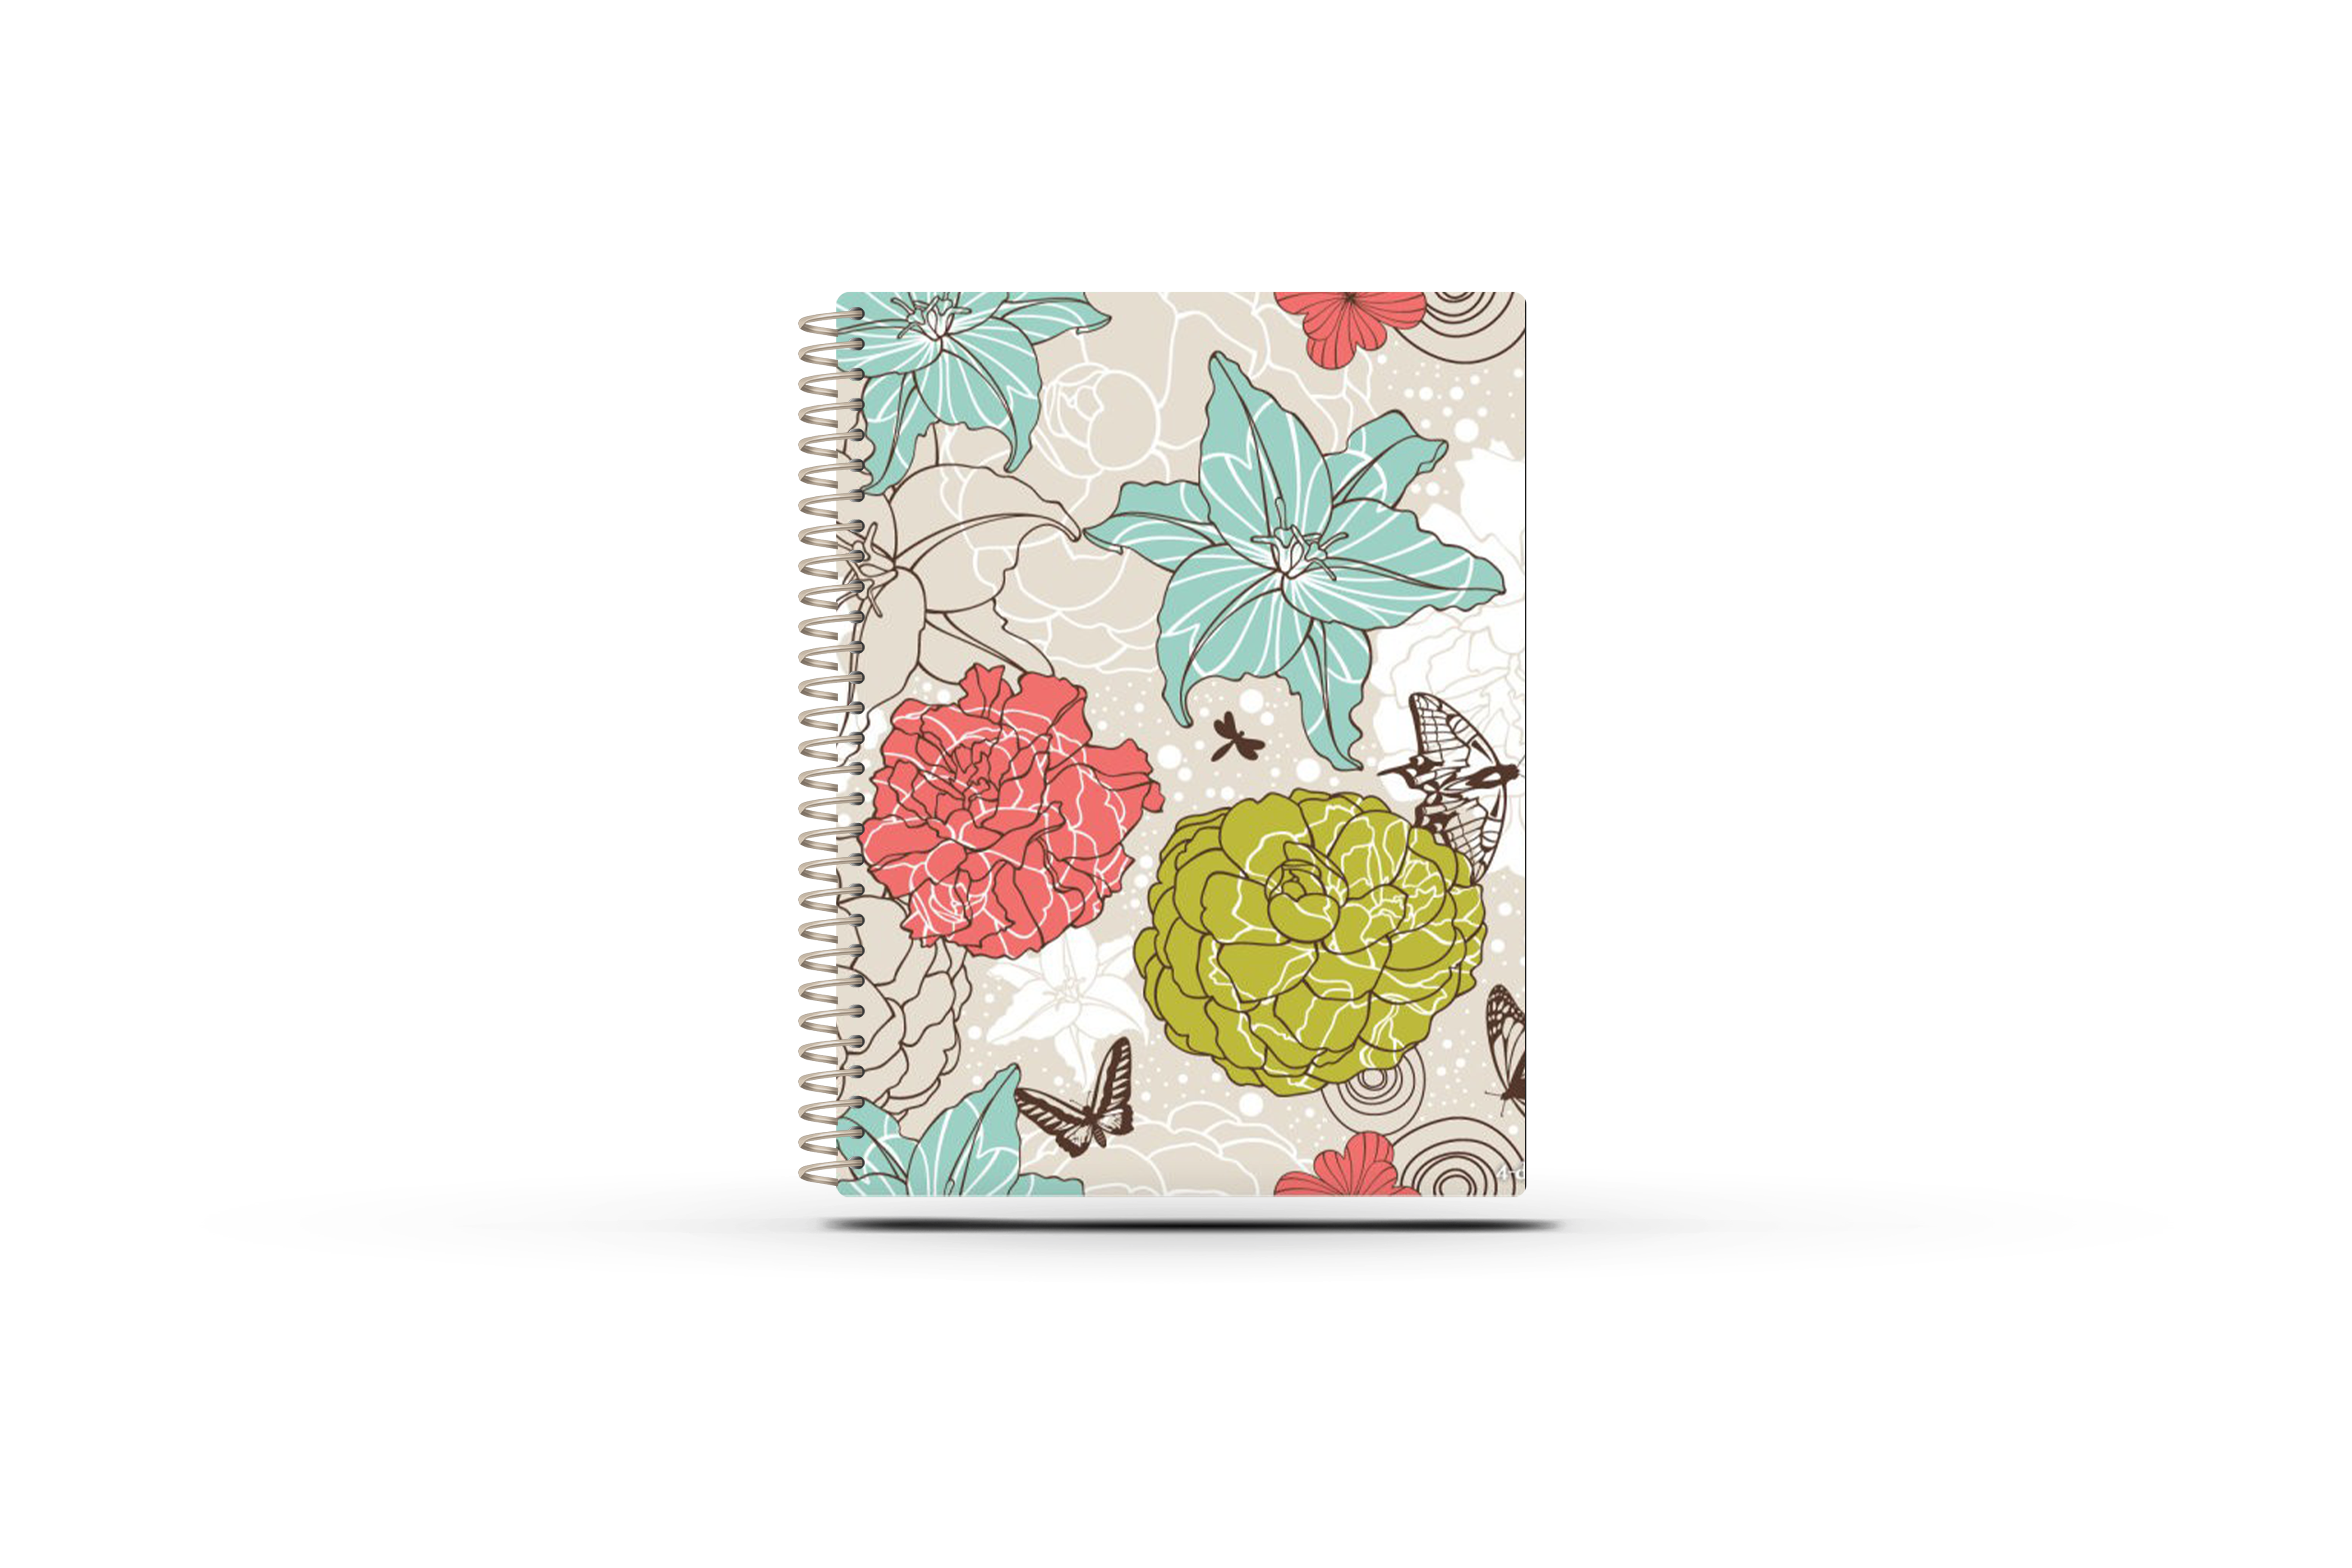 Sales Tracker Appointment Book - FLORAL BUTTERFLY